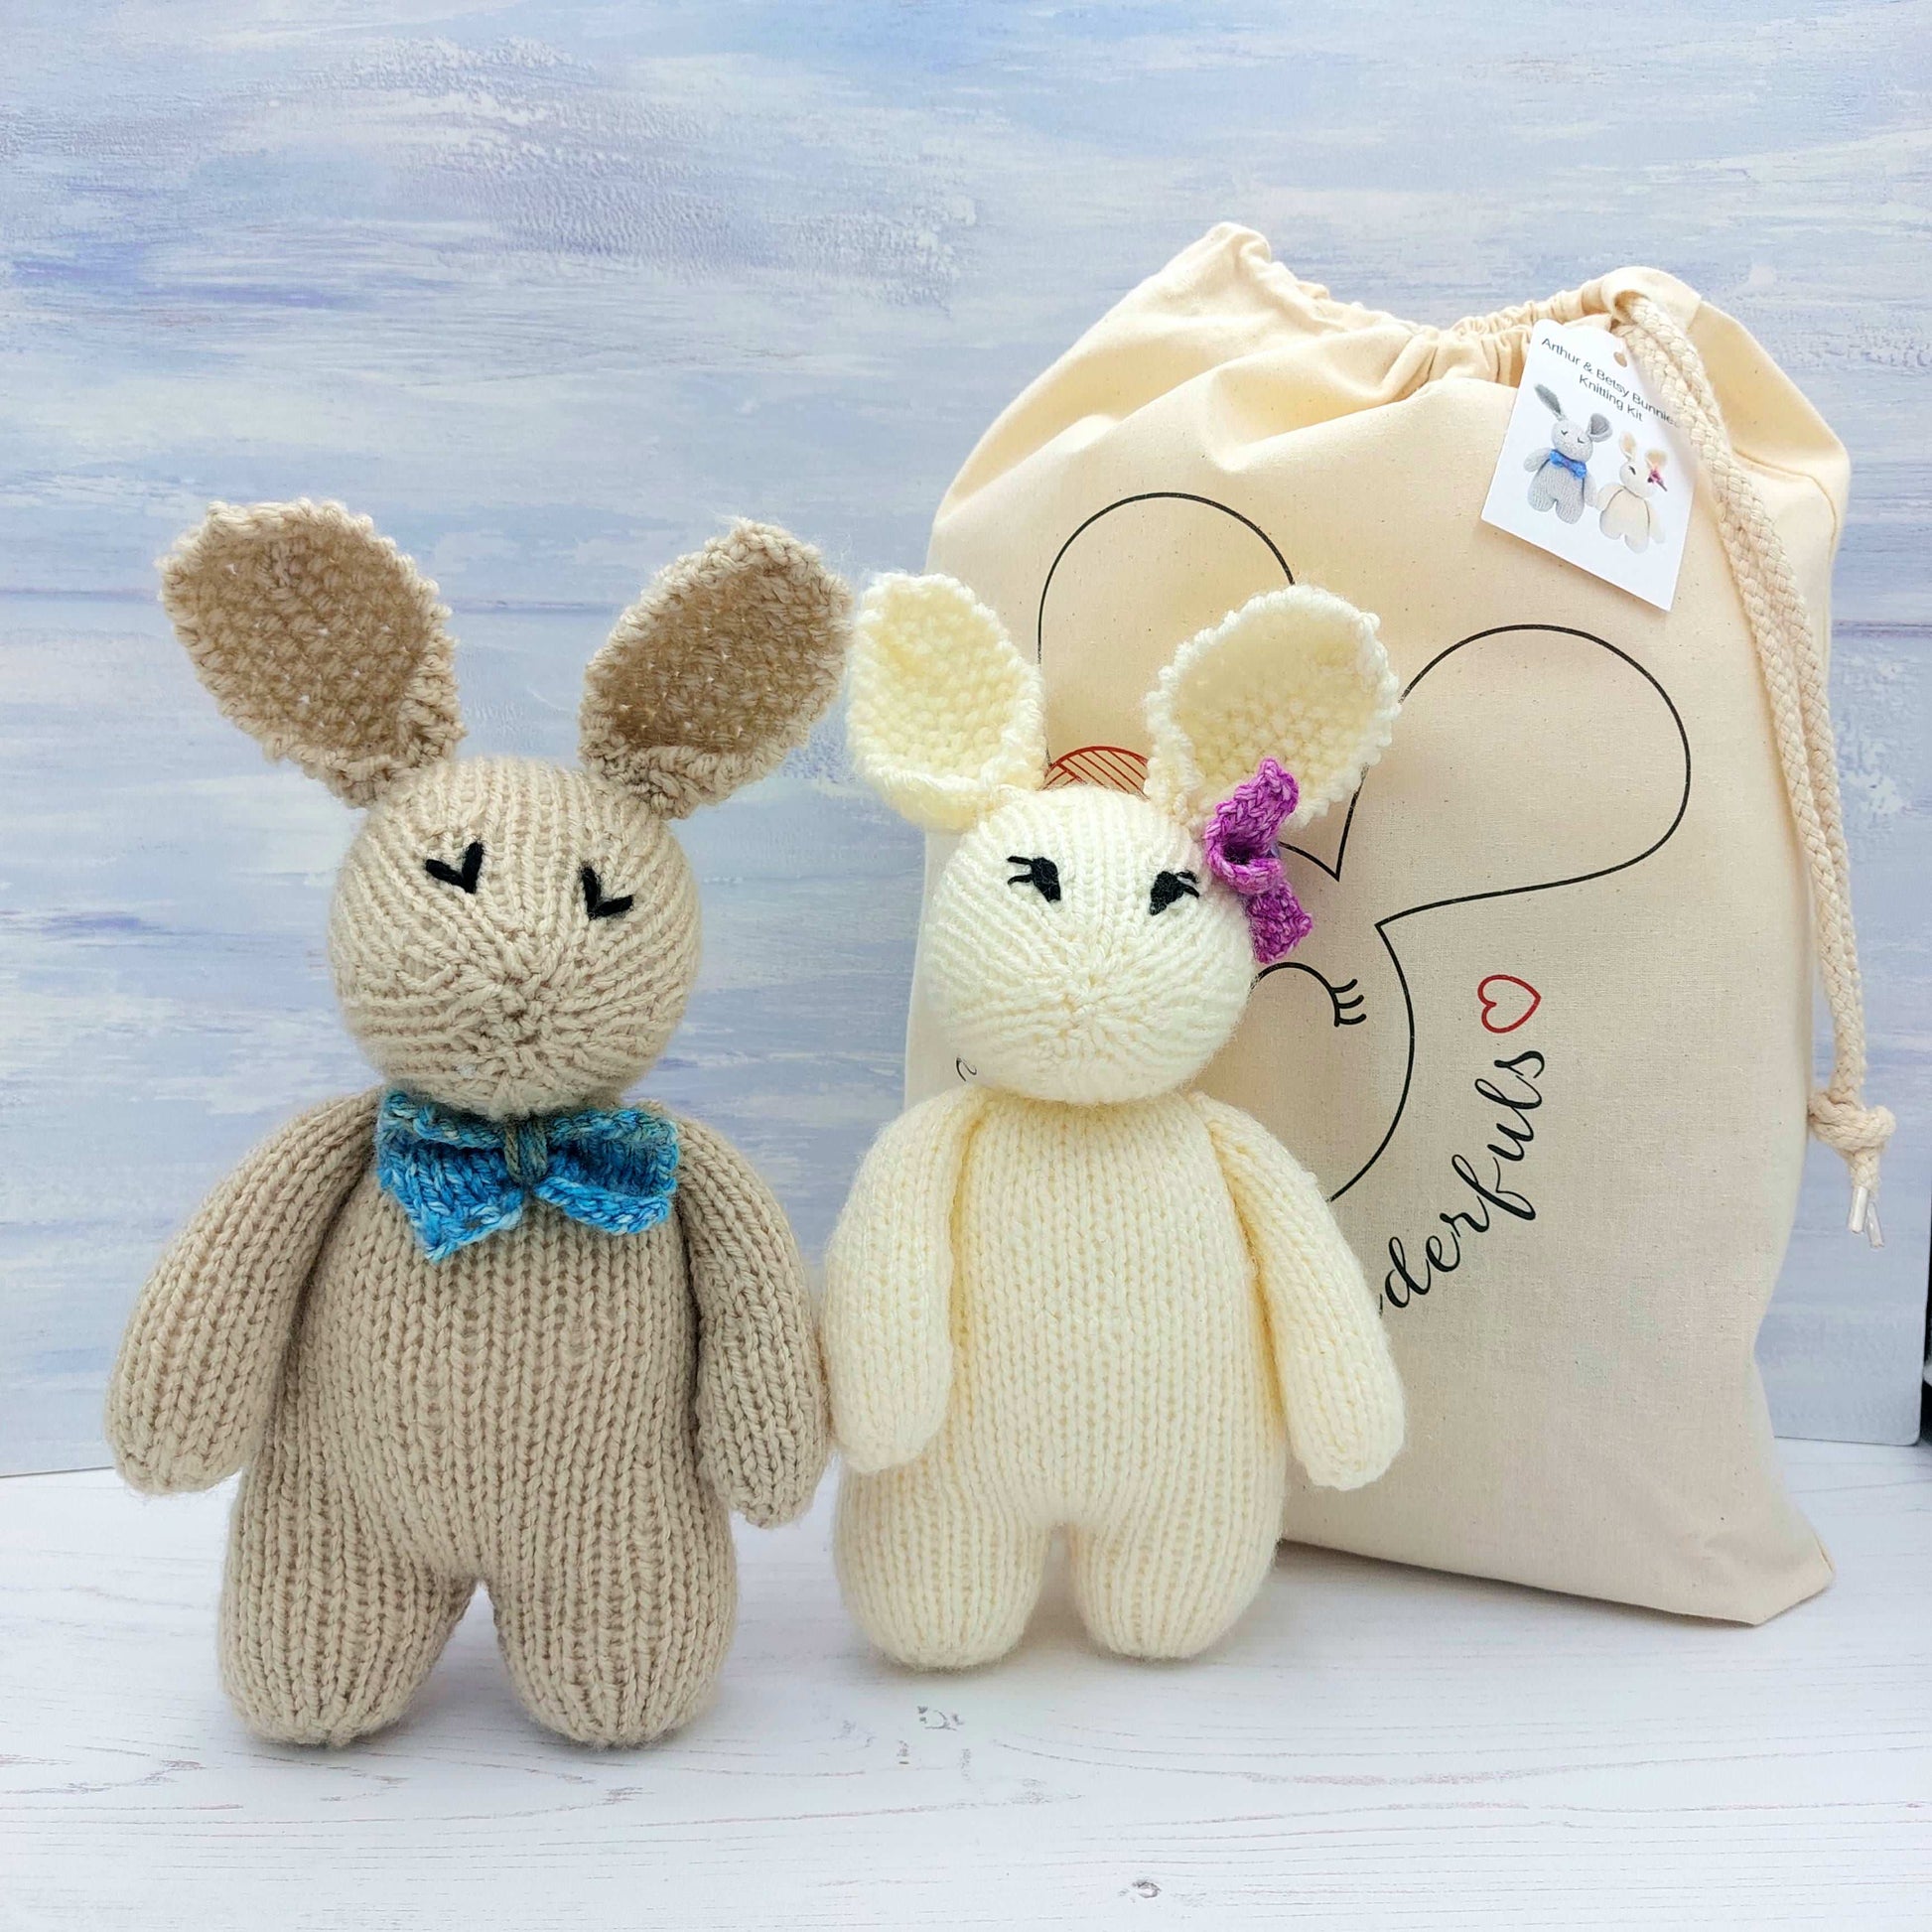 Rabbit Knitting Kit for Beginners with project bag